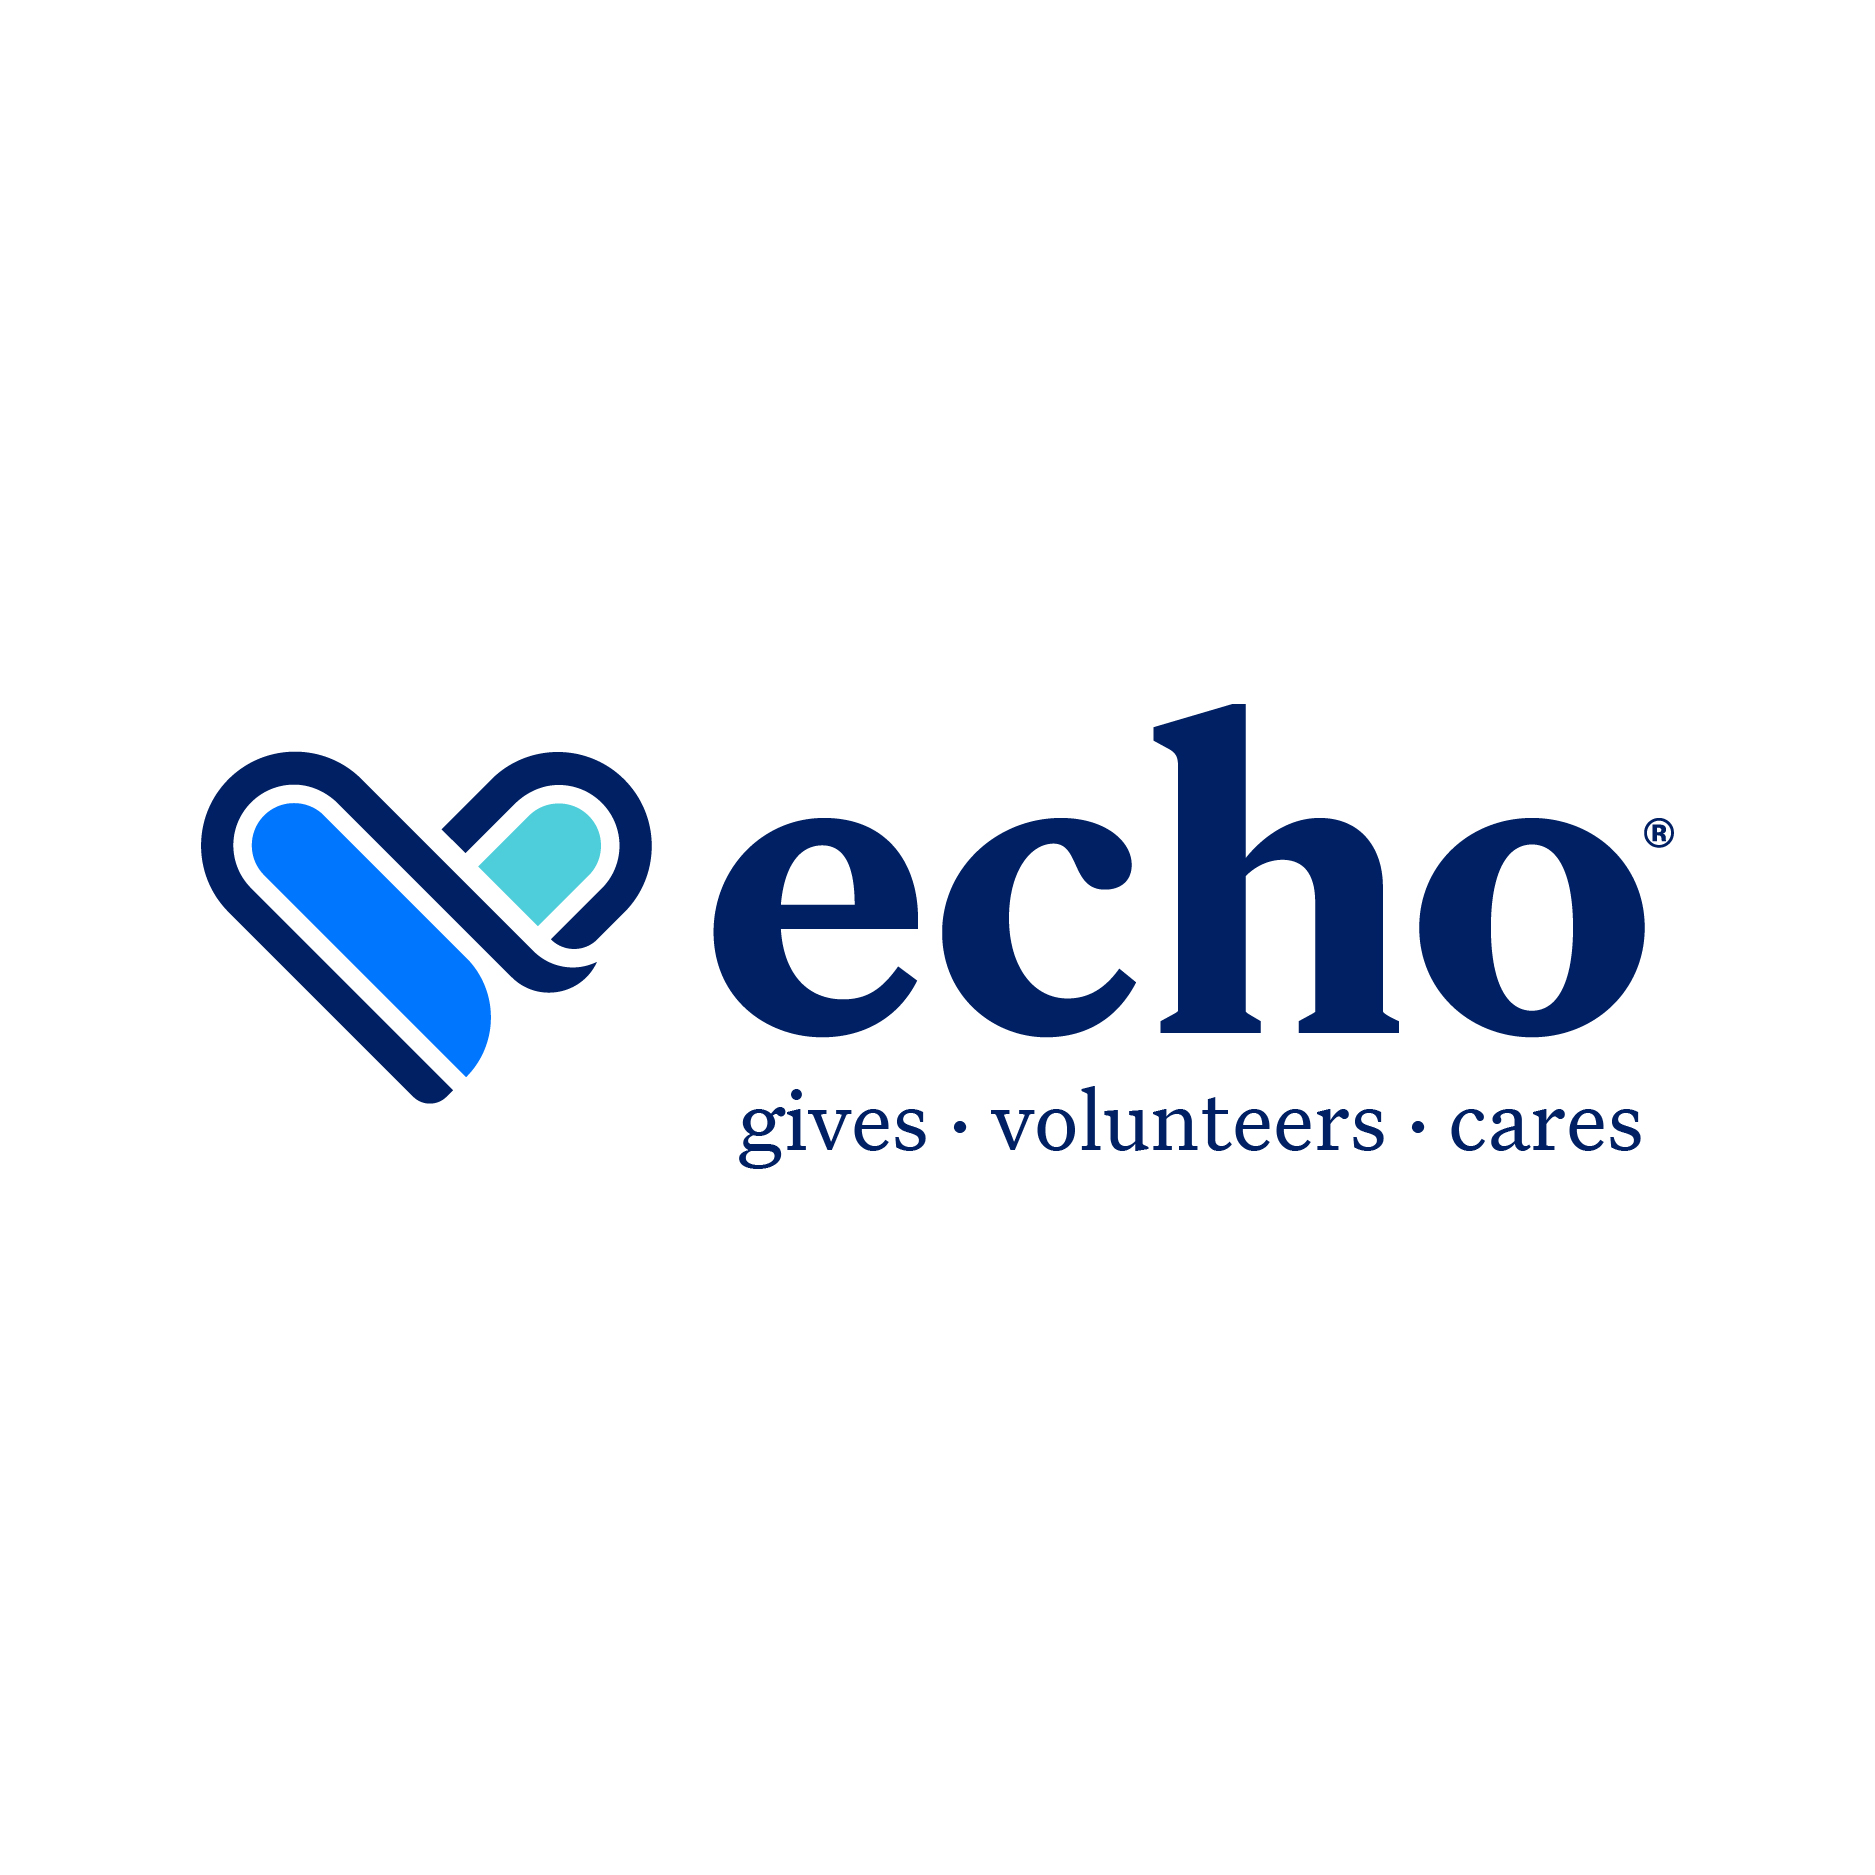 Echo+Cares+logo logo design by logo designer Rippke+Design for your inspiration and for the worlds largest logo competition